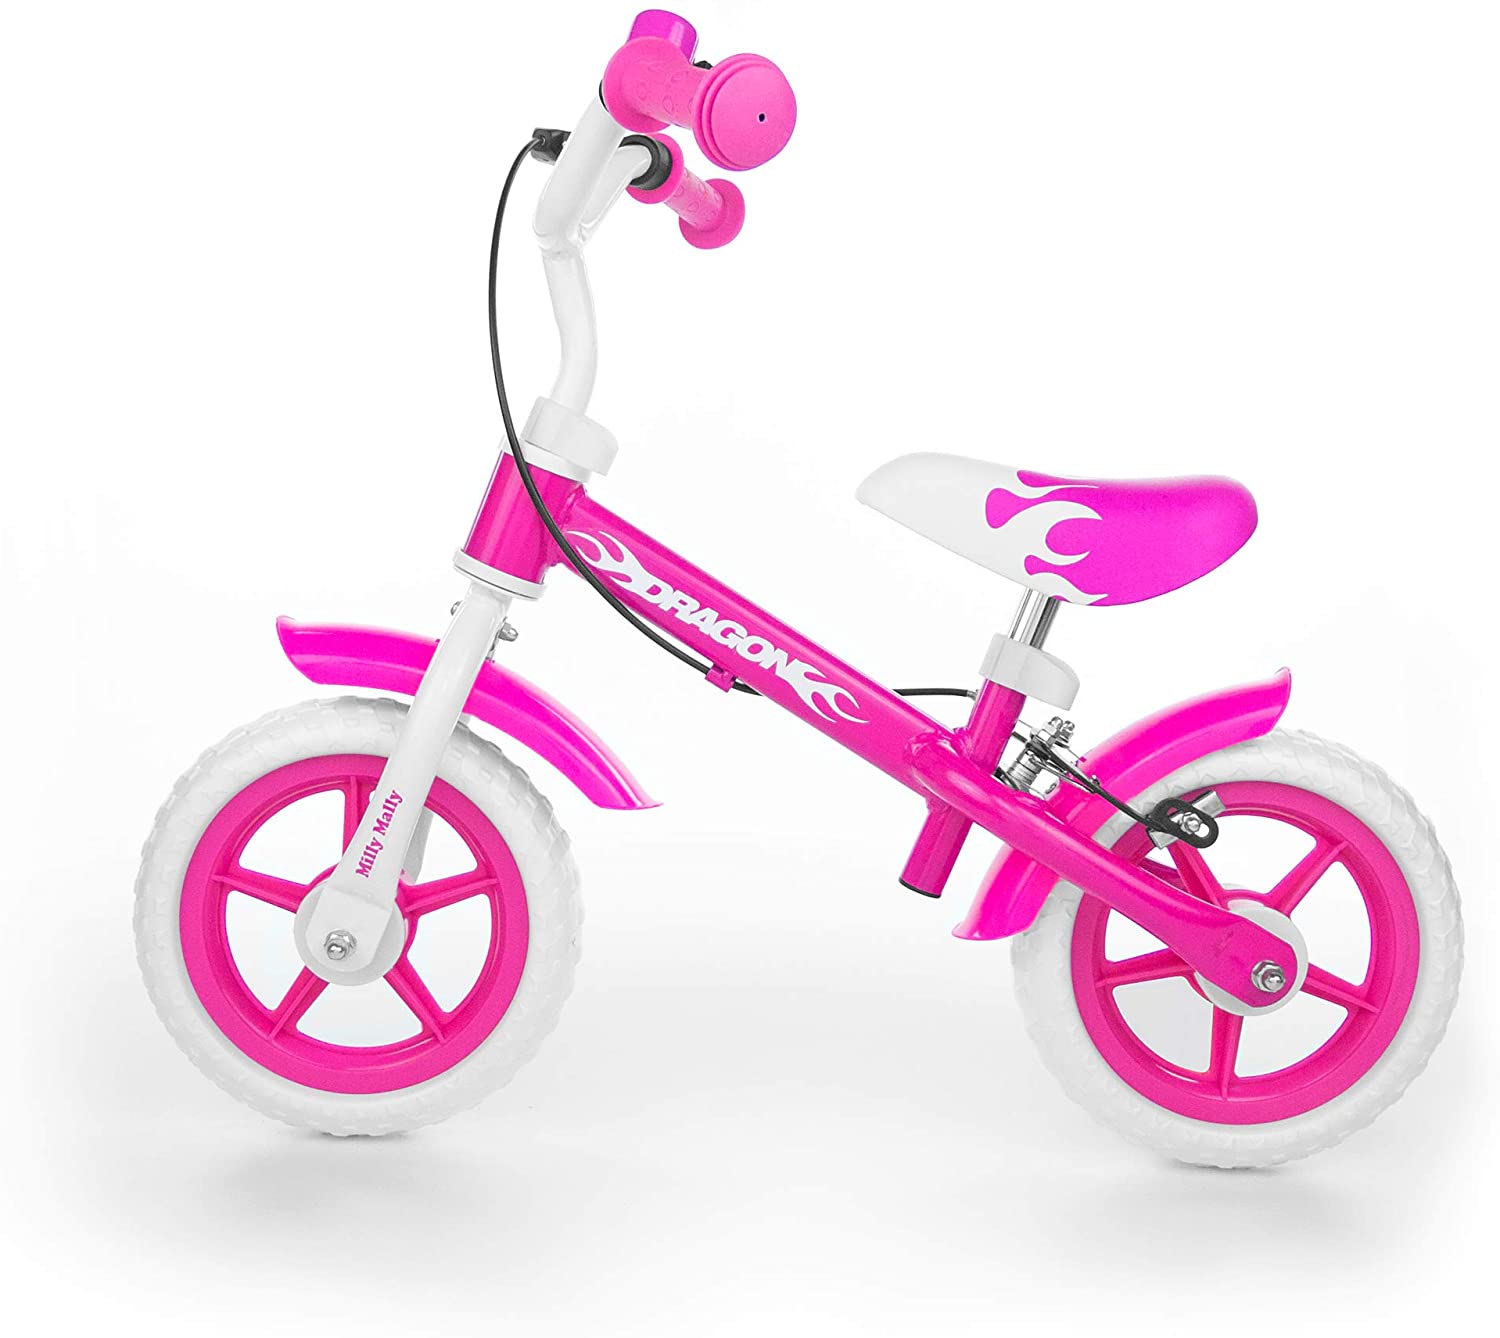 Milly Mally 2145 Childrens Balance Bike 10 Inch Wheels With Brakes And Bel